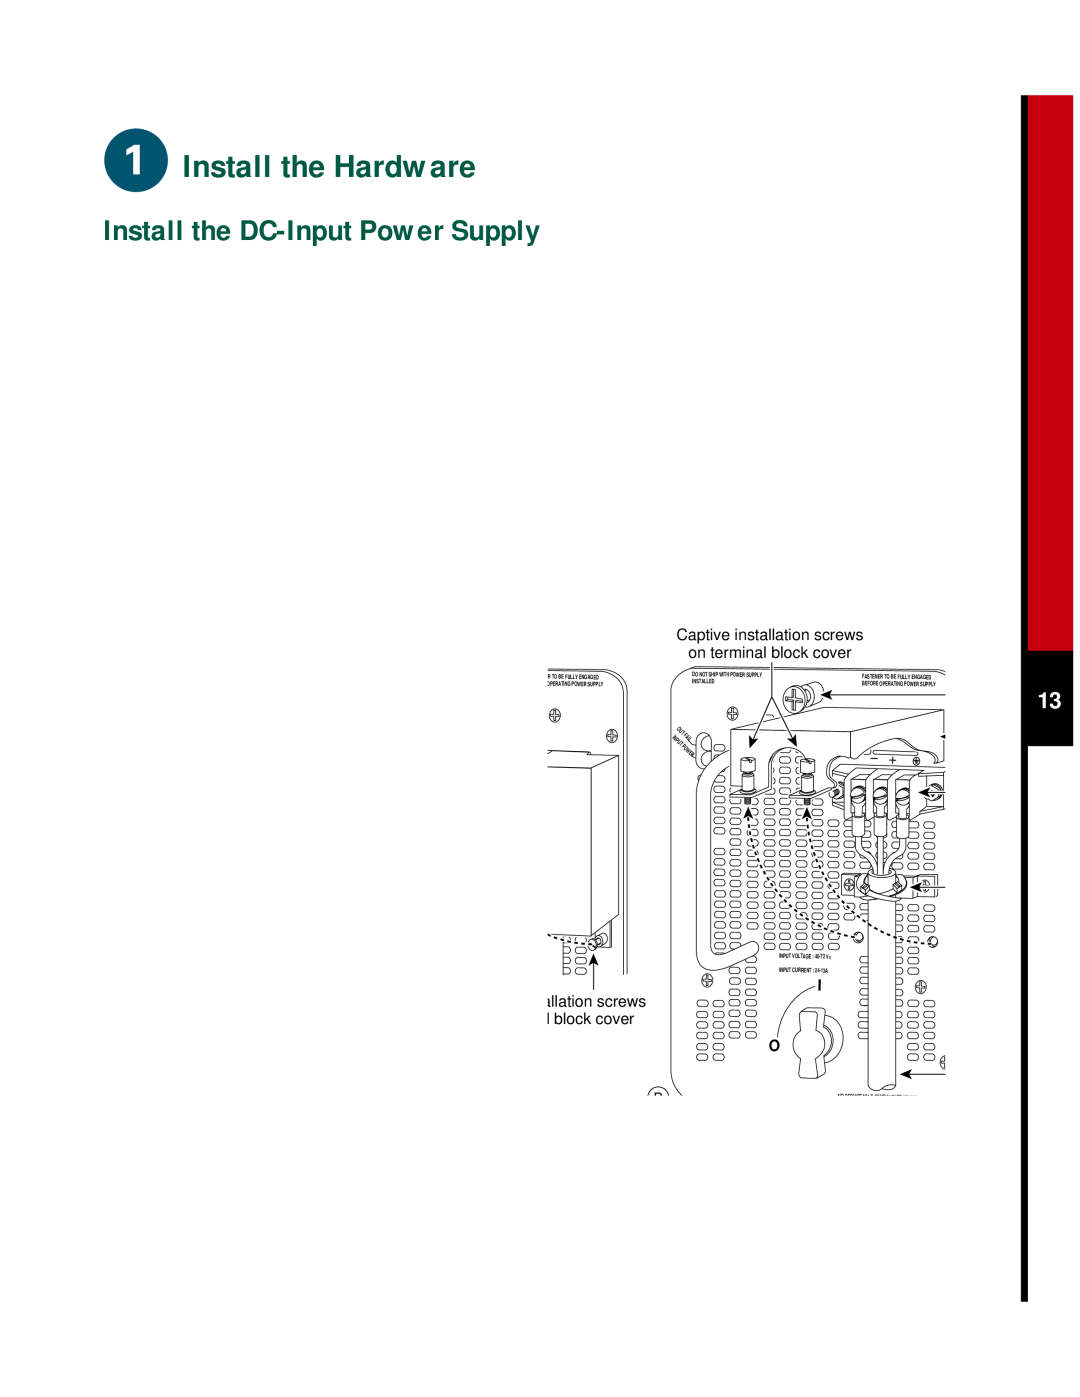 Cisco Systems 7507 Install the DC-Input Power Supply, Install the Hardware, Captive installation screws, l block cover 